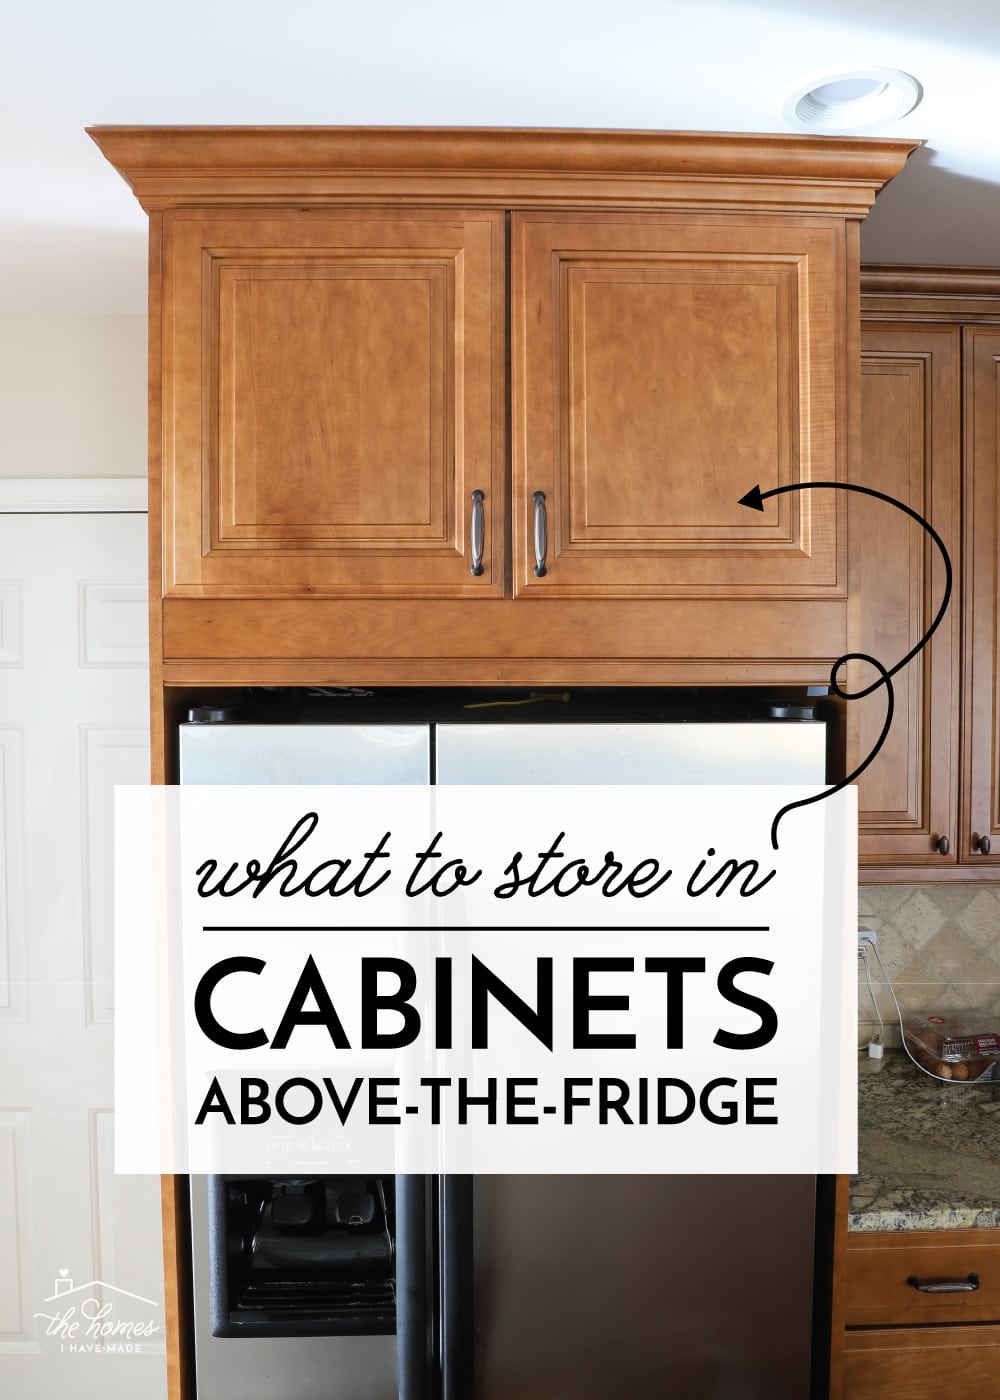 Cabinets Above a Refrigerator with text overlay